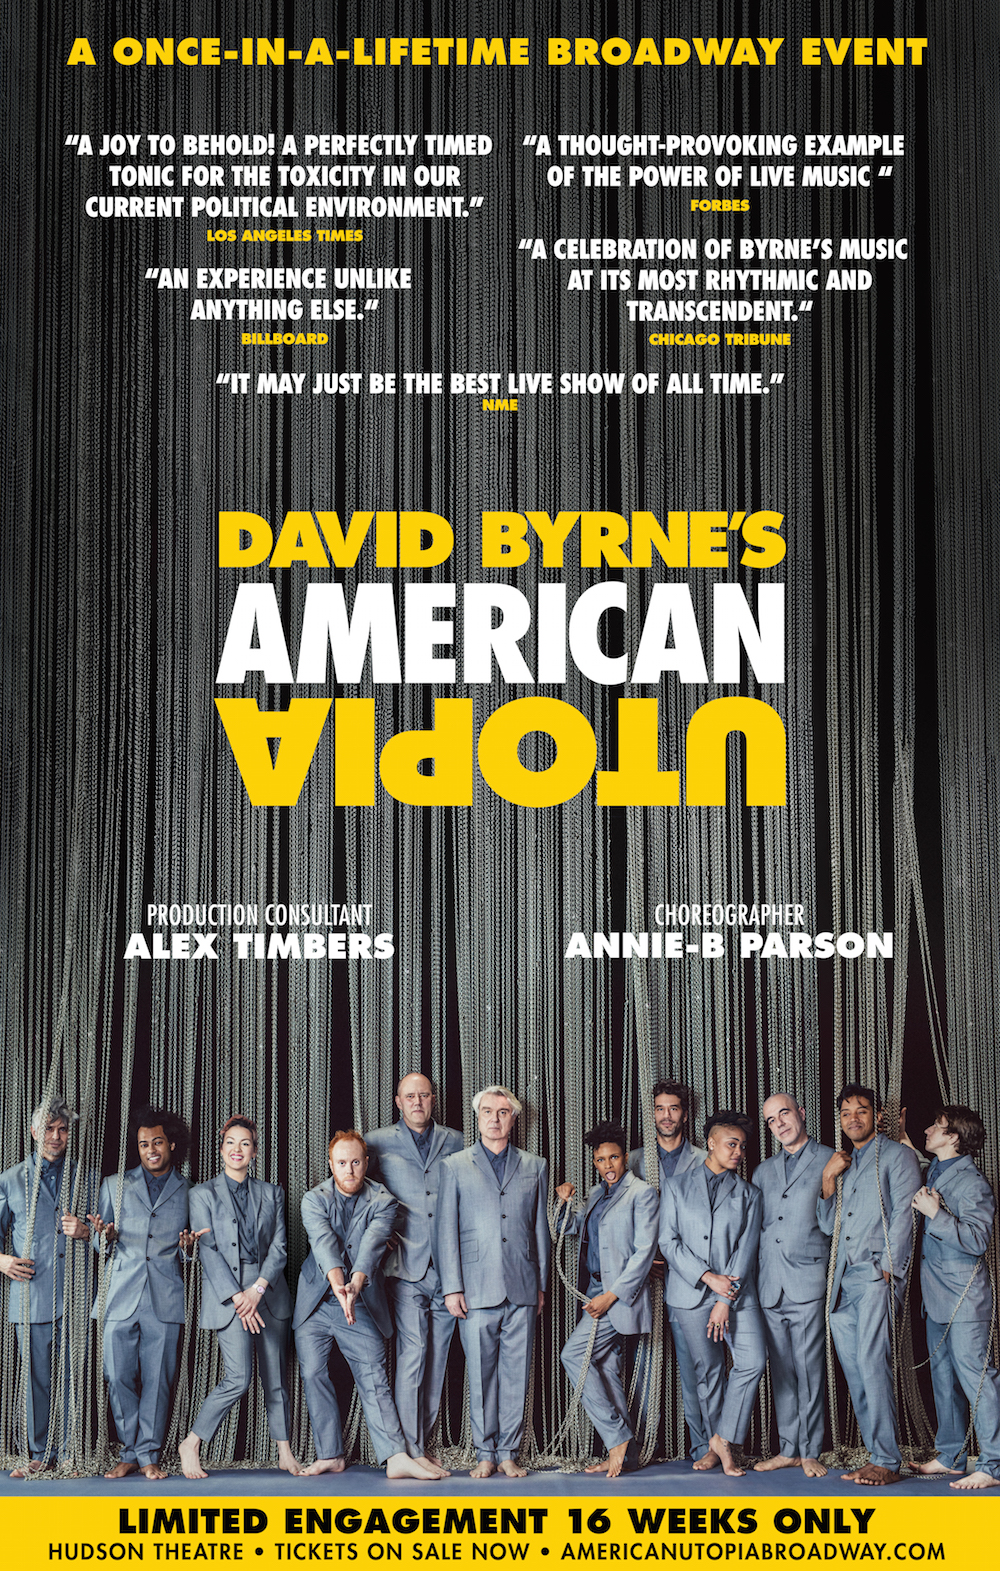 David Byrne to Rock Broadway This October with American Utopia